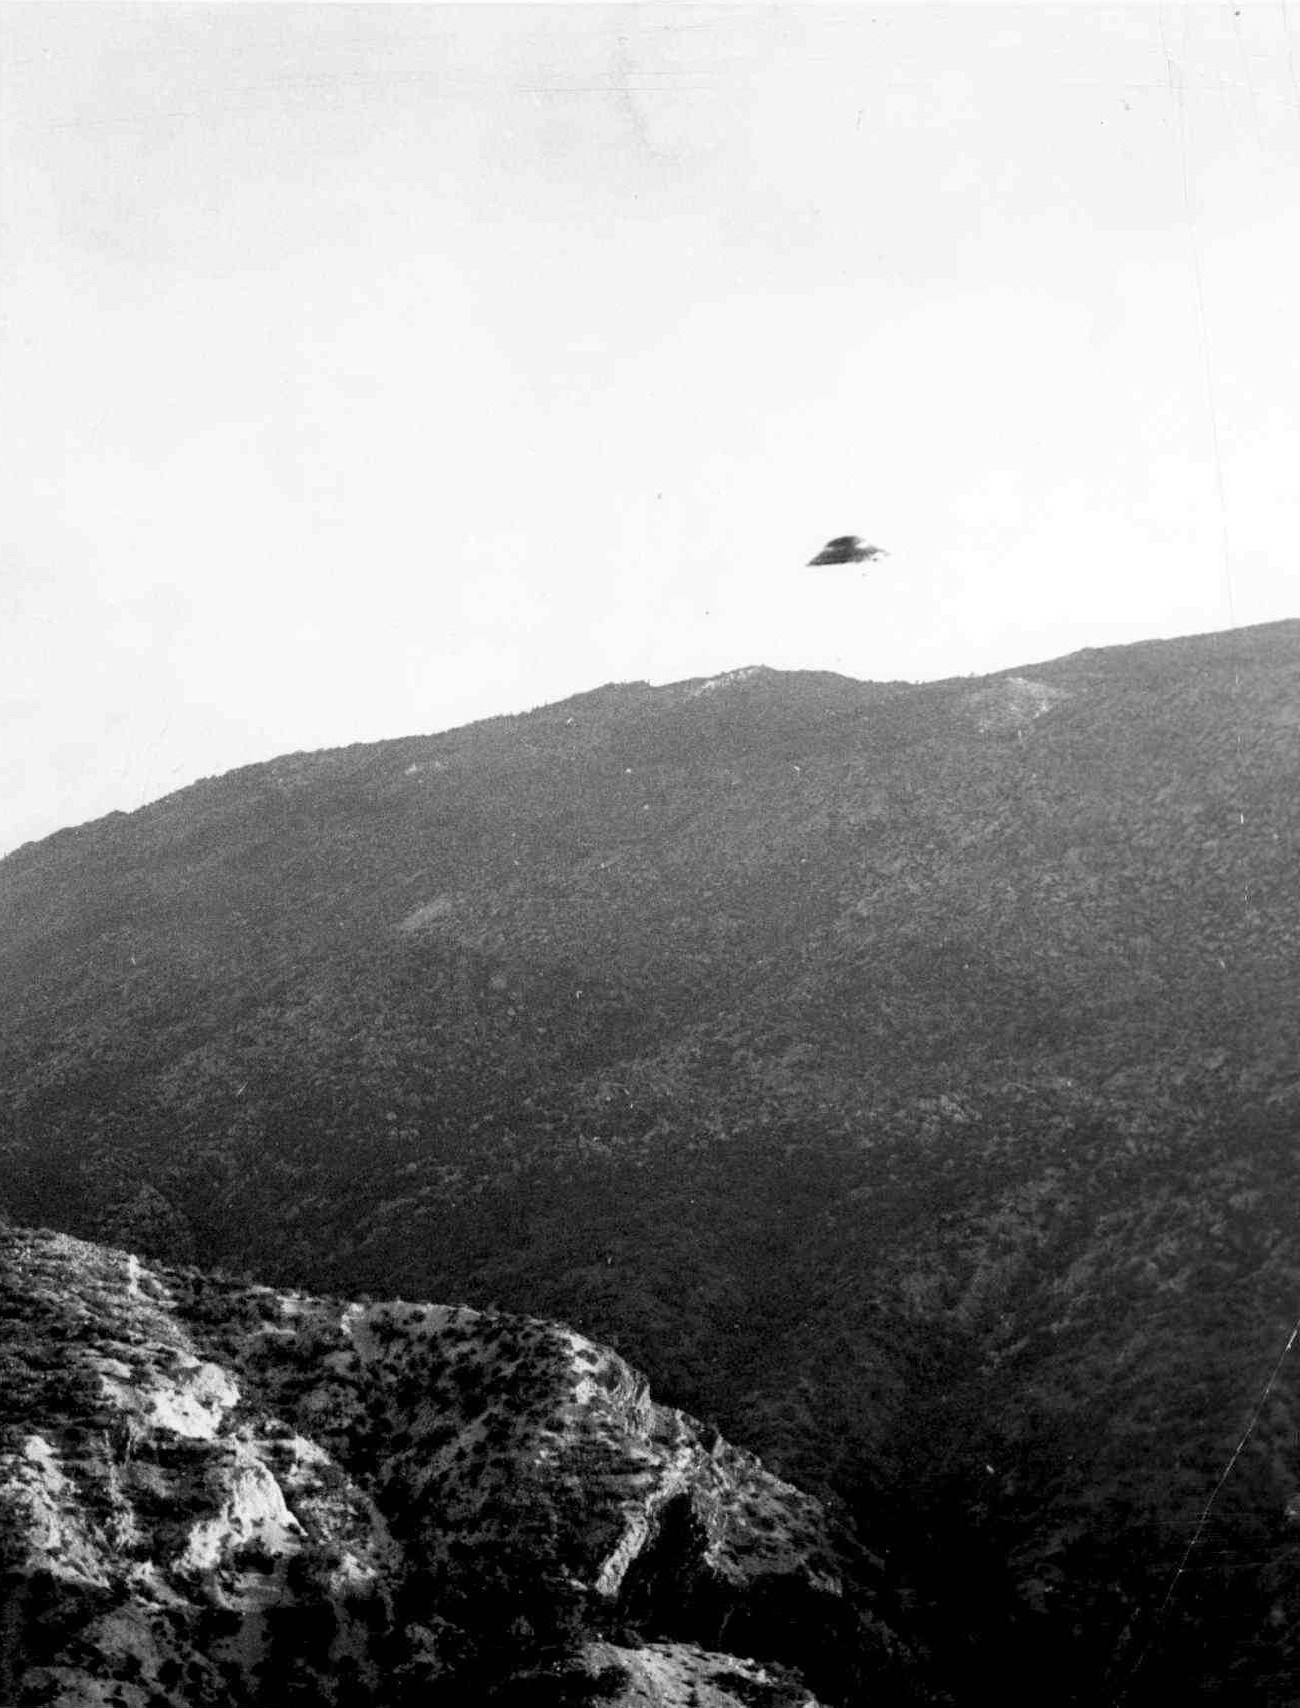 a ufo flies through the sky above a large forested hill in black and white.